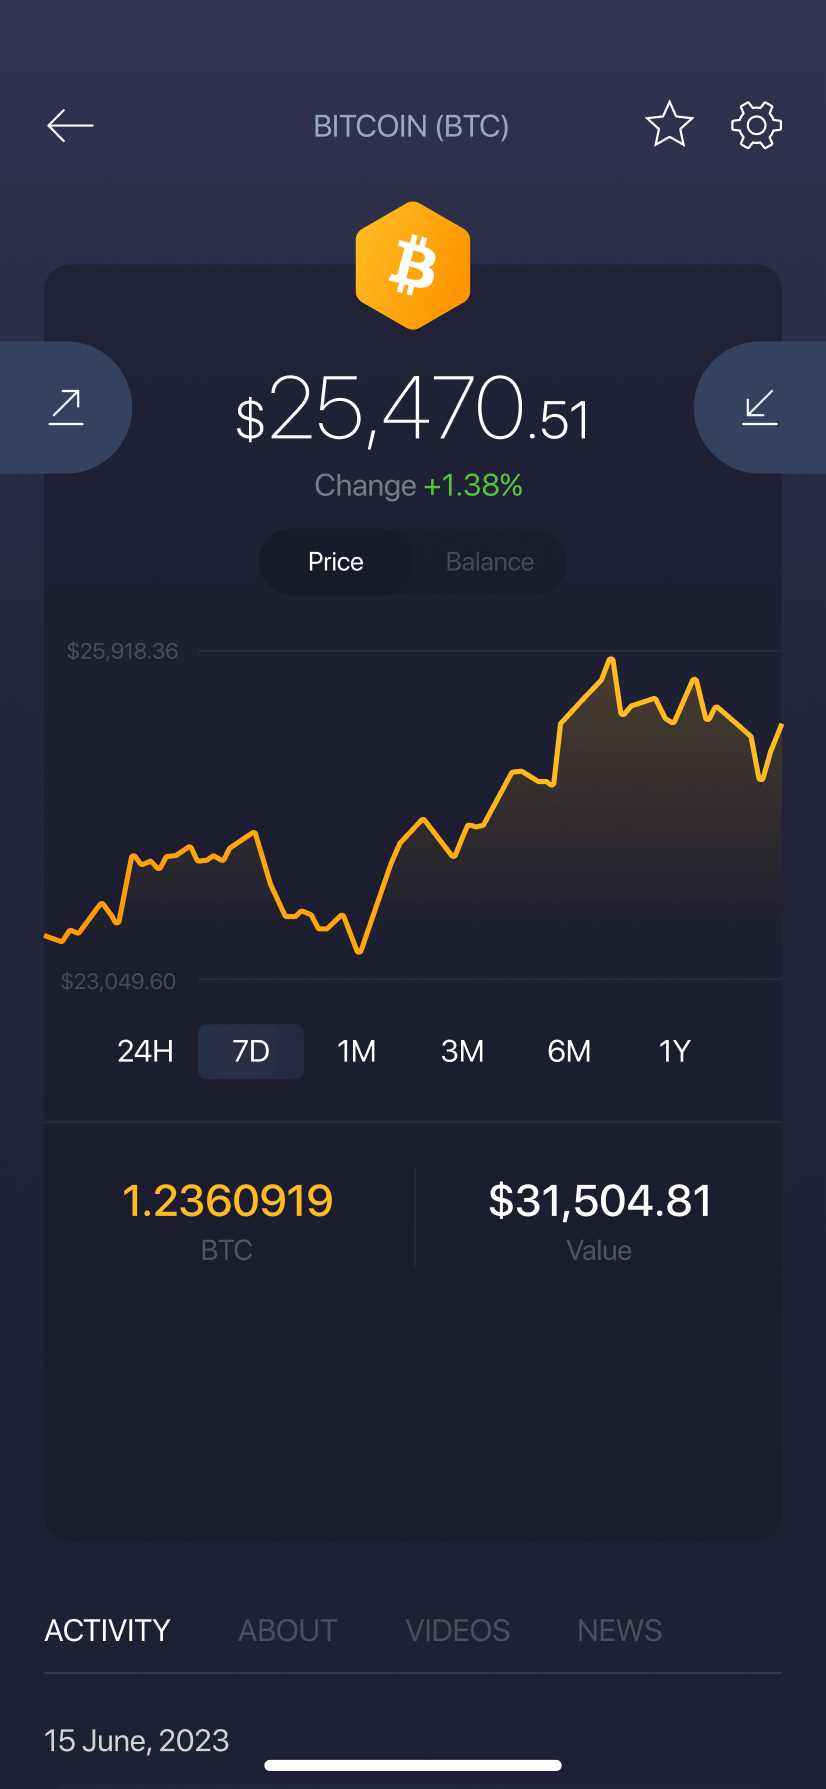 The Exodus mobile crypto wallet has a different screen for each crypto asset, telling you the asset's price history, your balance, activity, and more